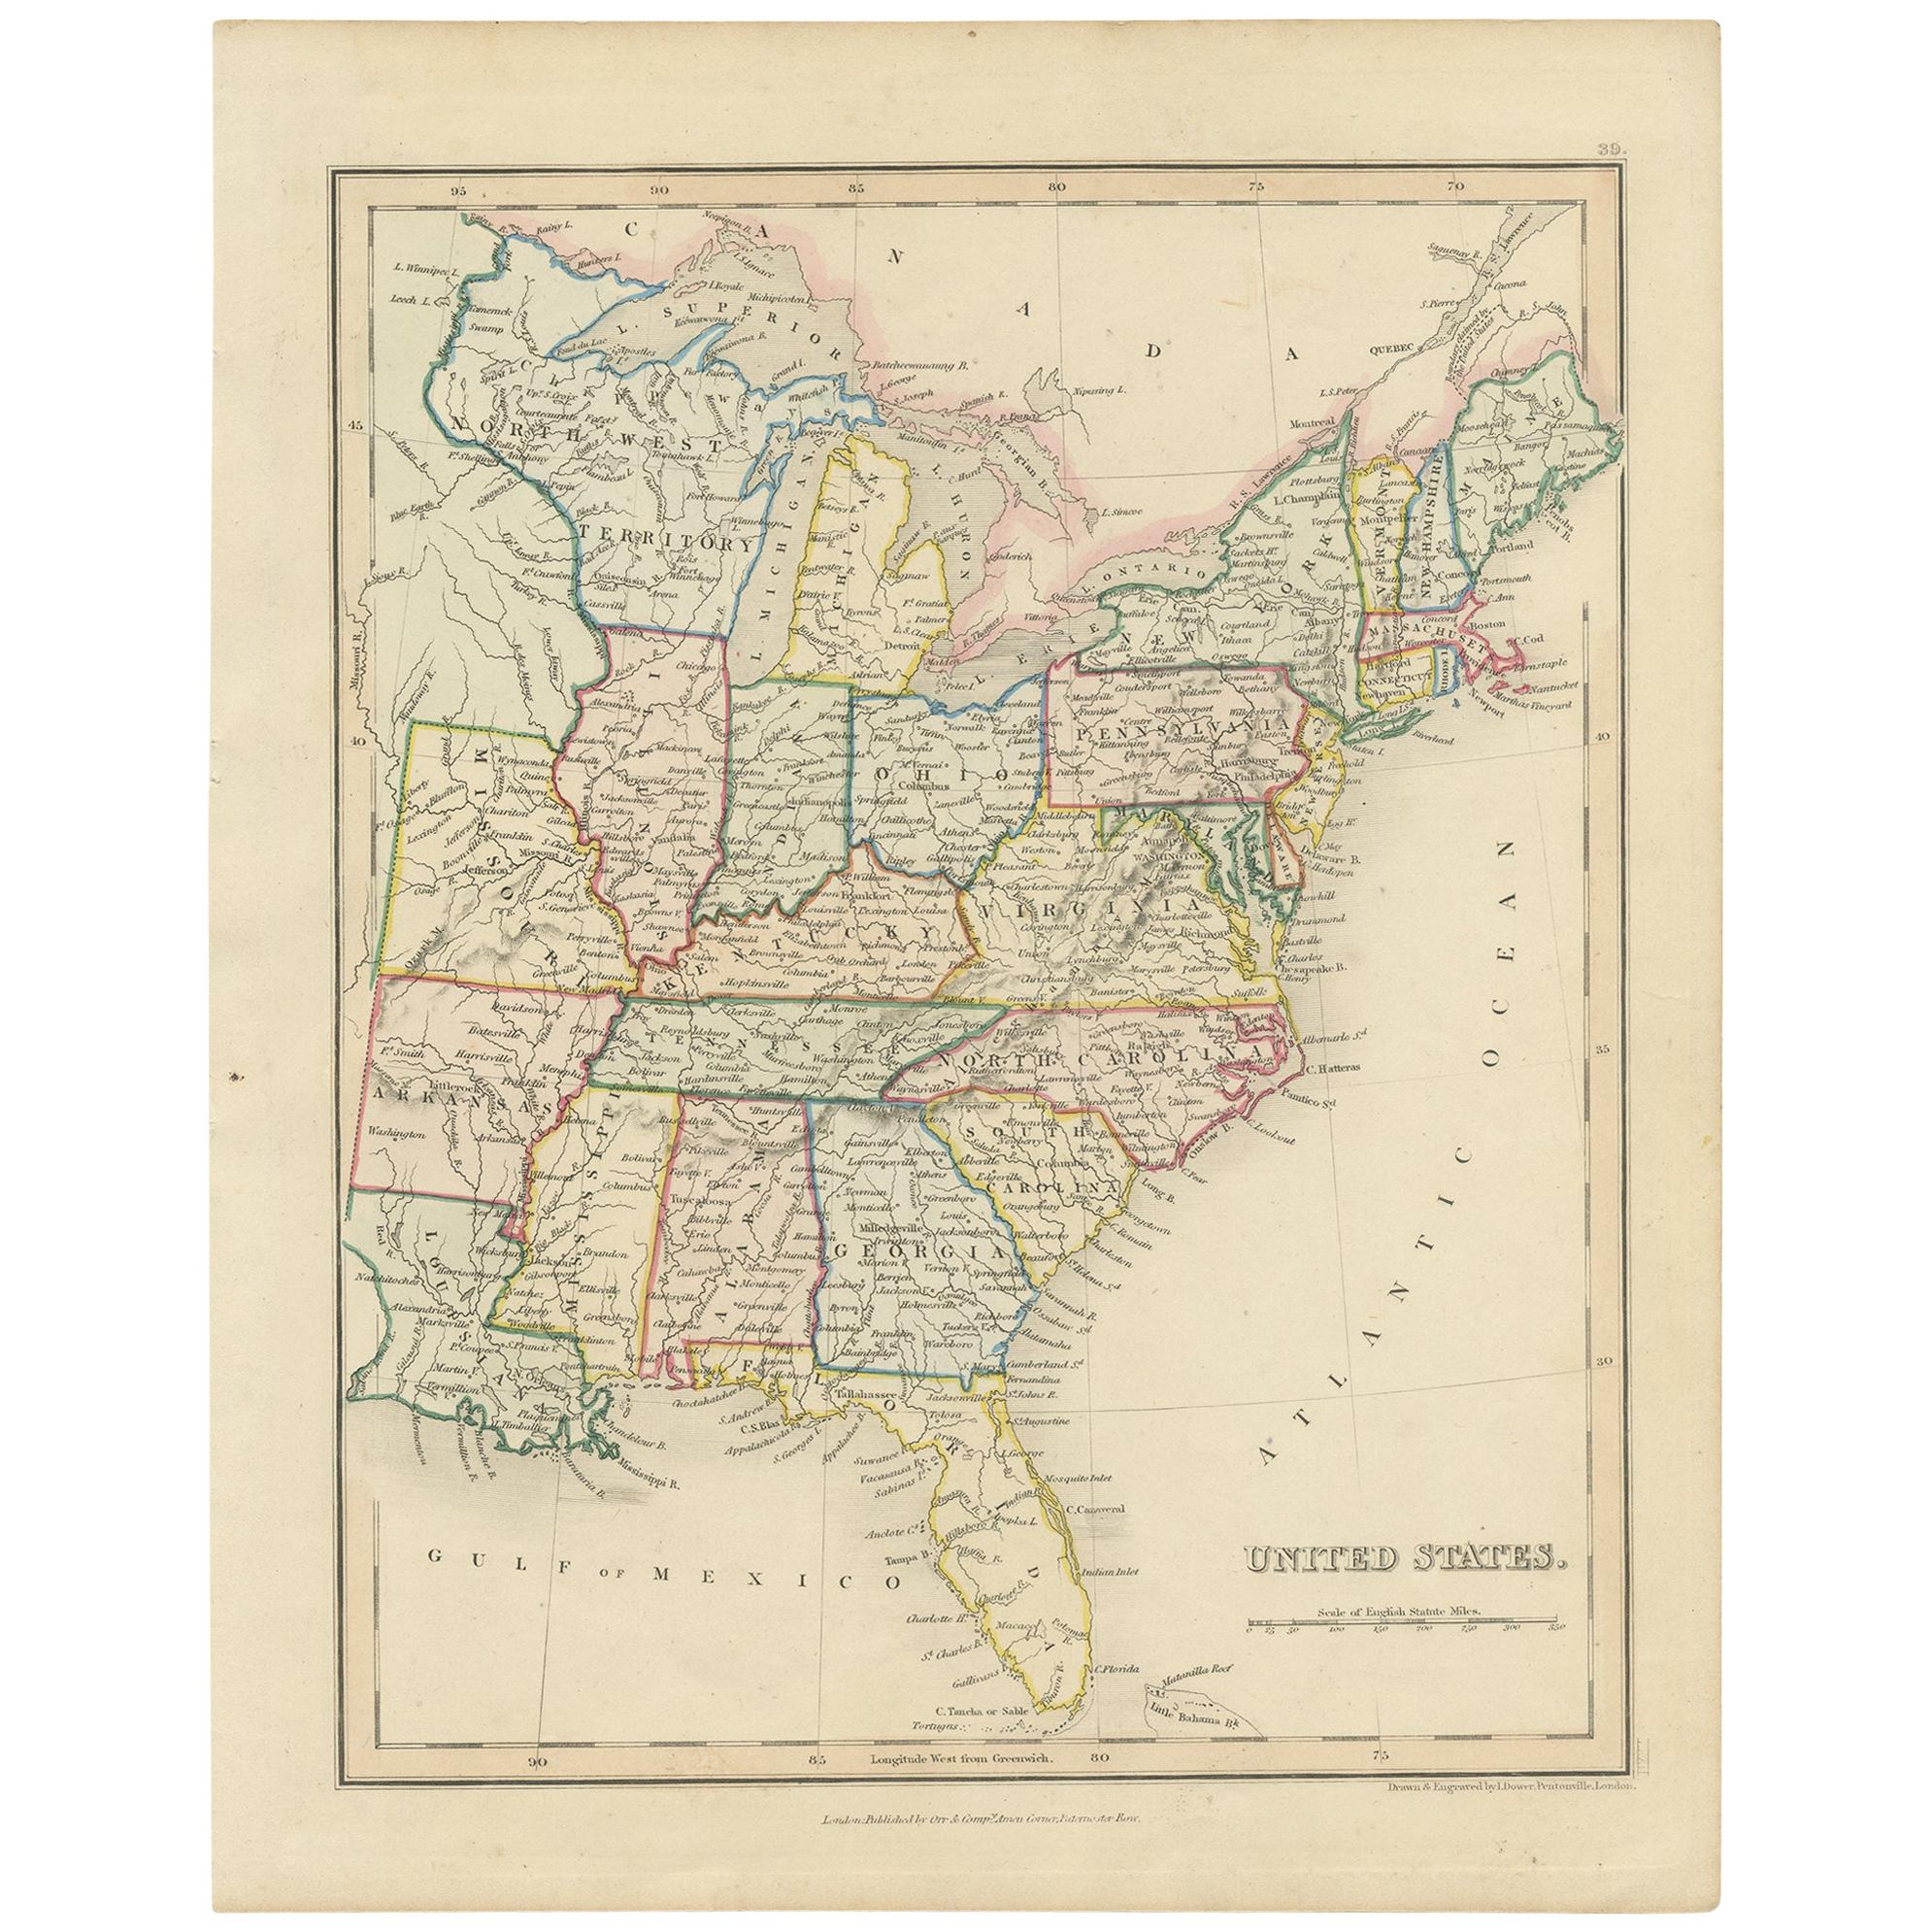 Antique Map of the United States by Dower, circa 1845